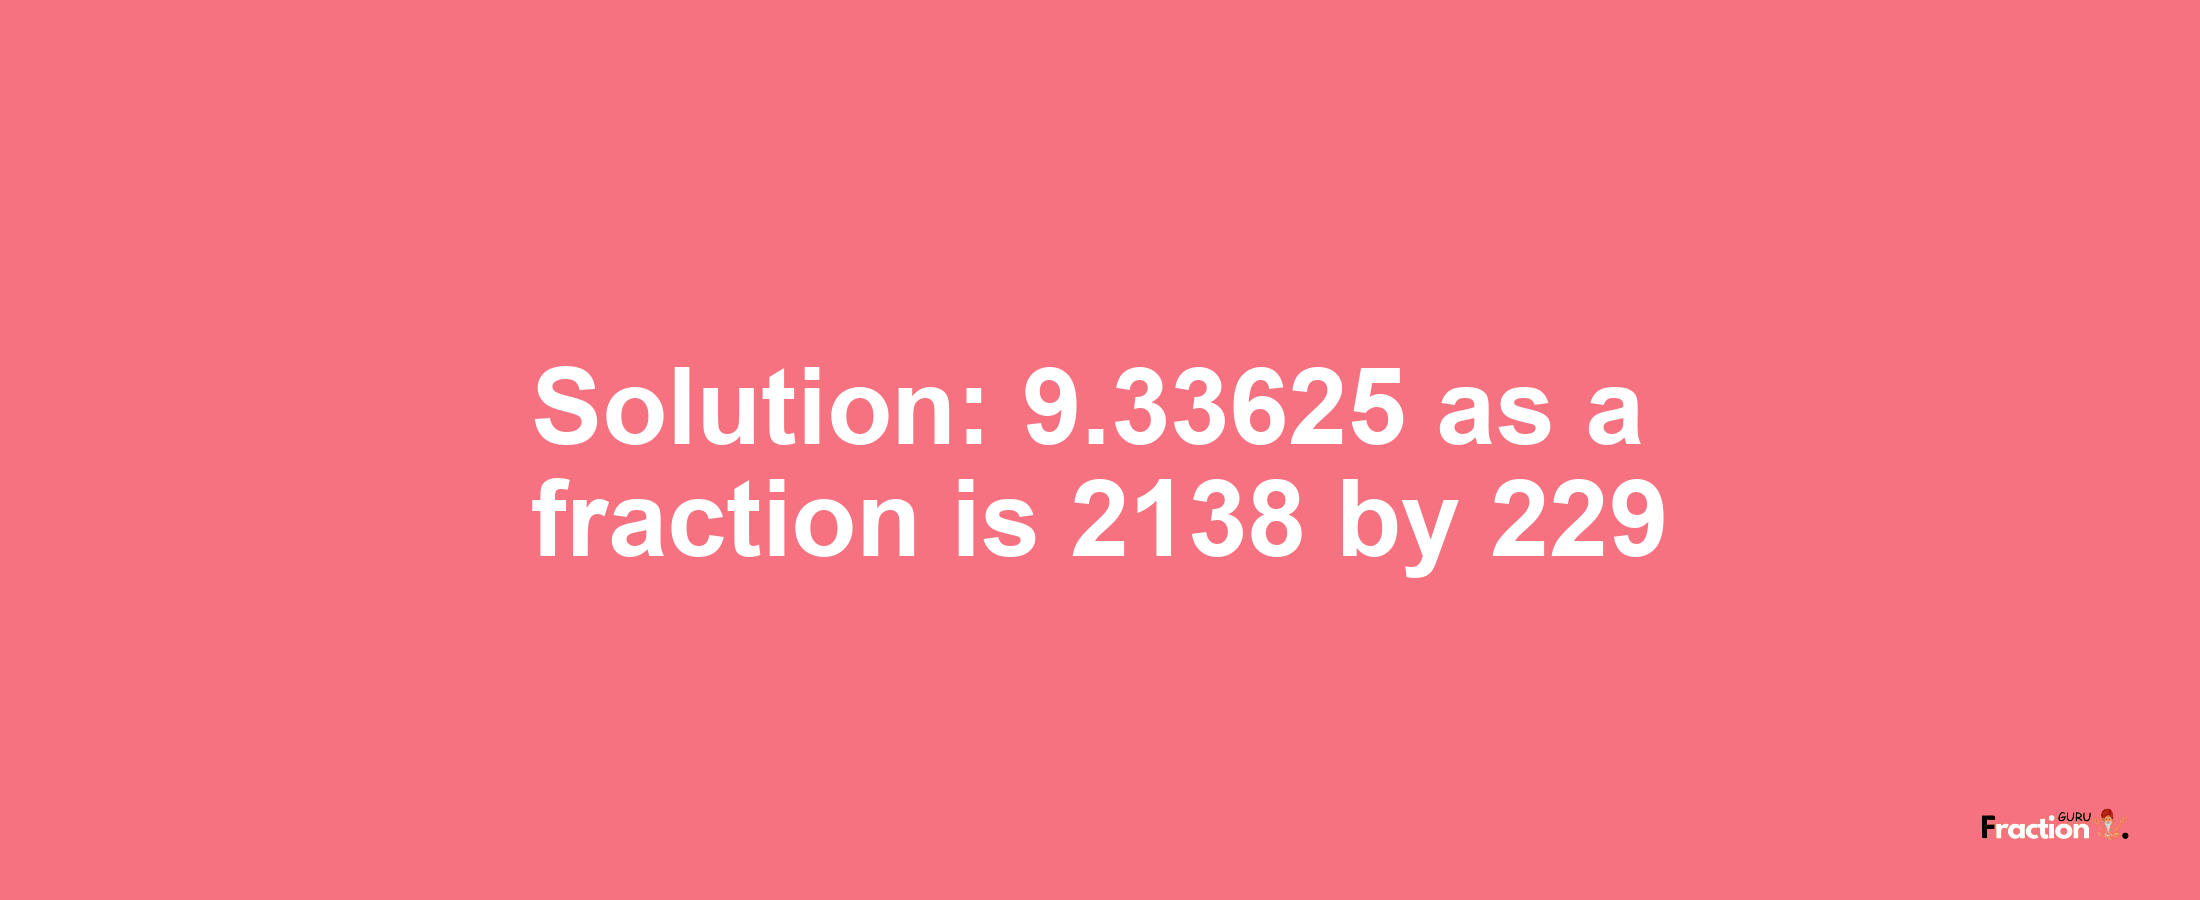 Solution:9.33625 as a fraction is 2138/229